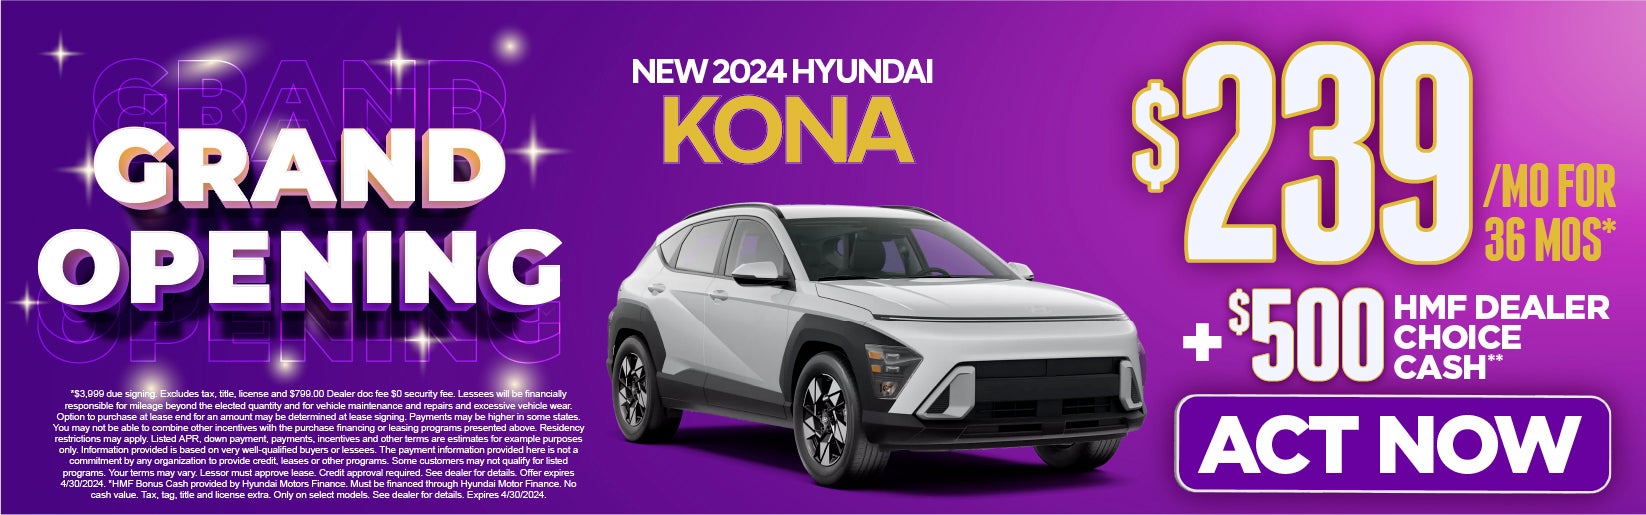 2024 Hyundai Kona - $239 per month for 36 months. Act Now.